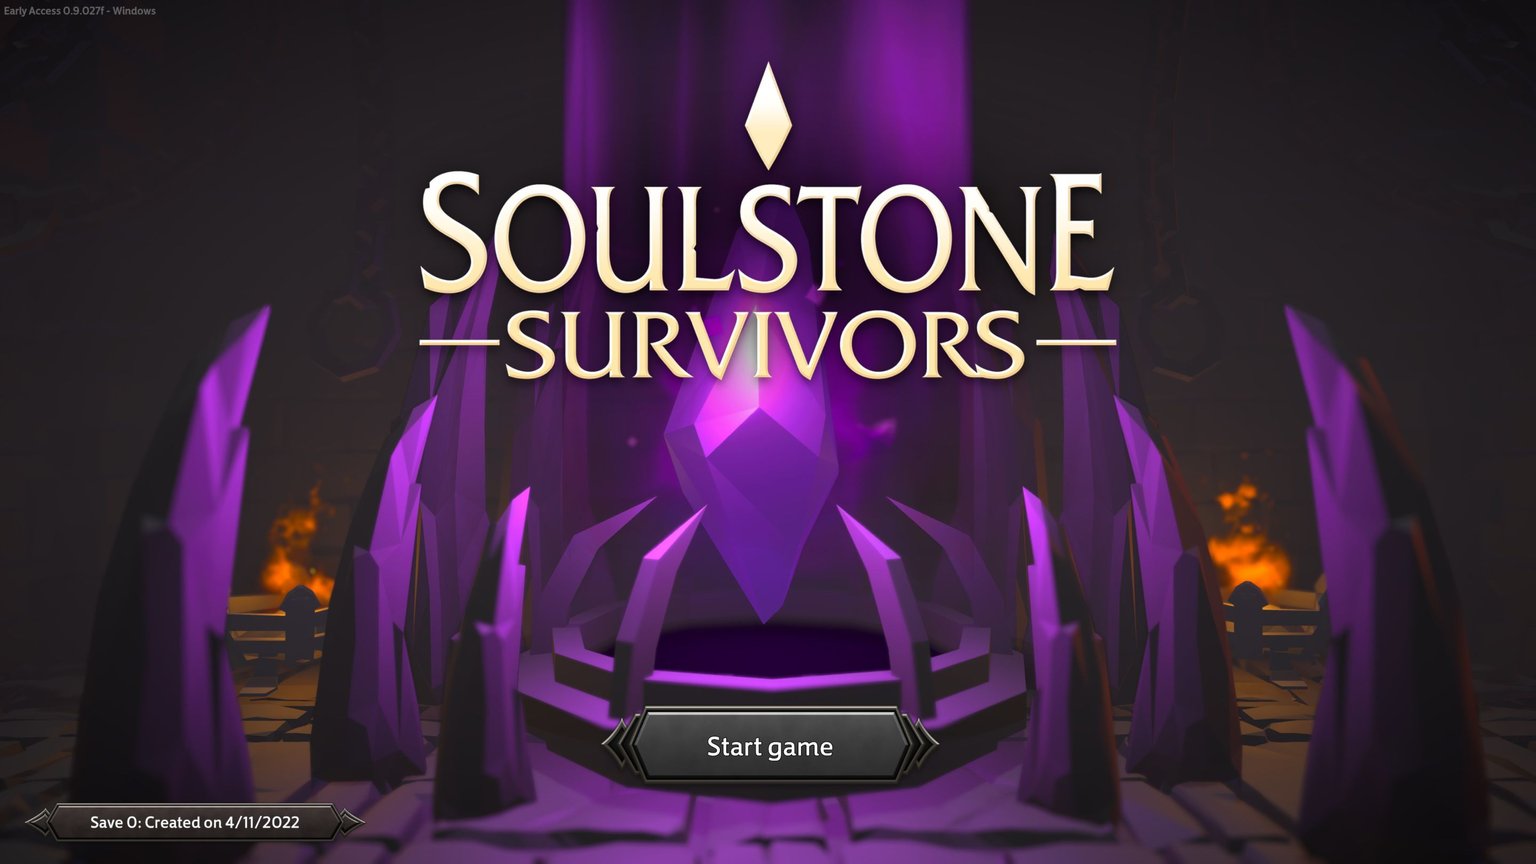 Soulstone Survivors - Early Access Teaser 